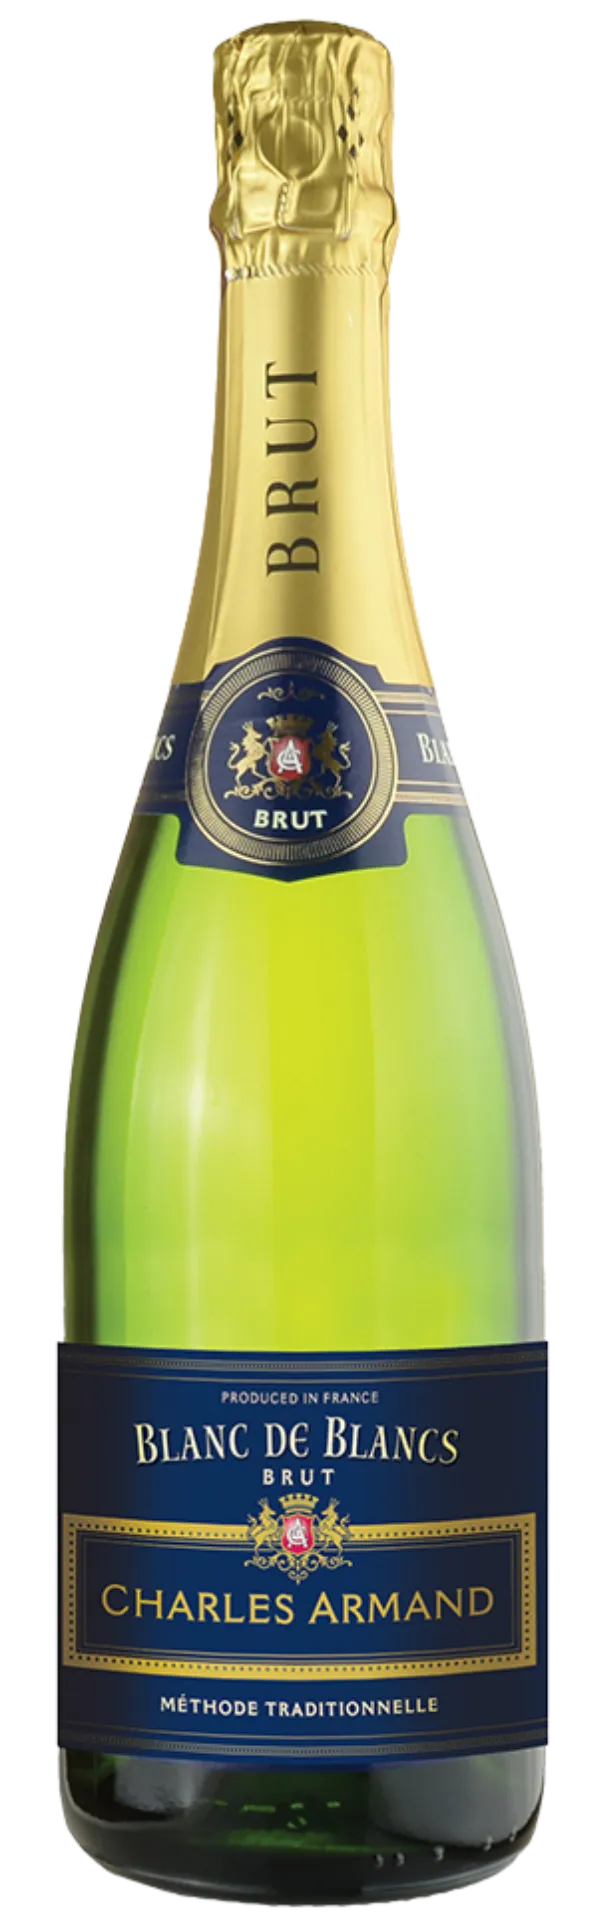 Bottle of Charles Armand Blanc de Blancs Brutwith label visible